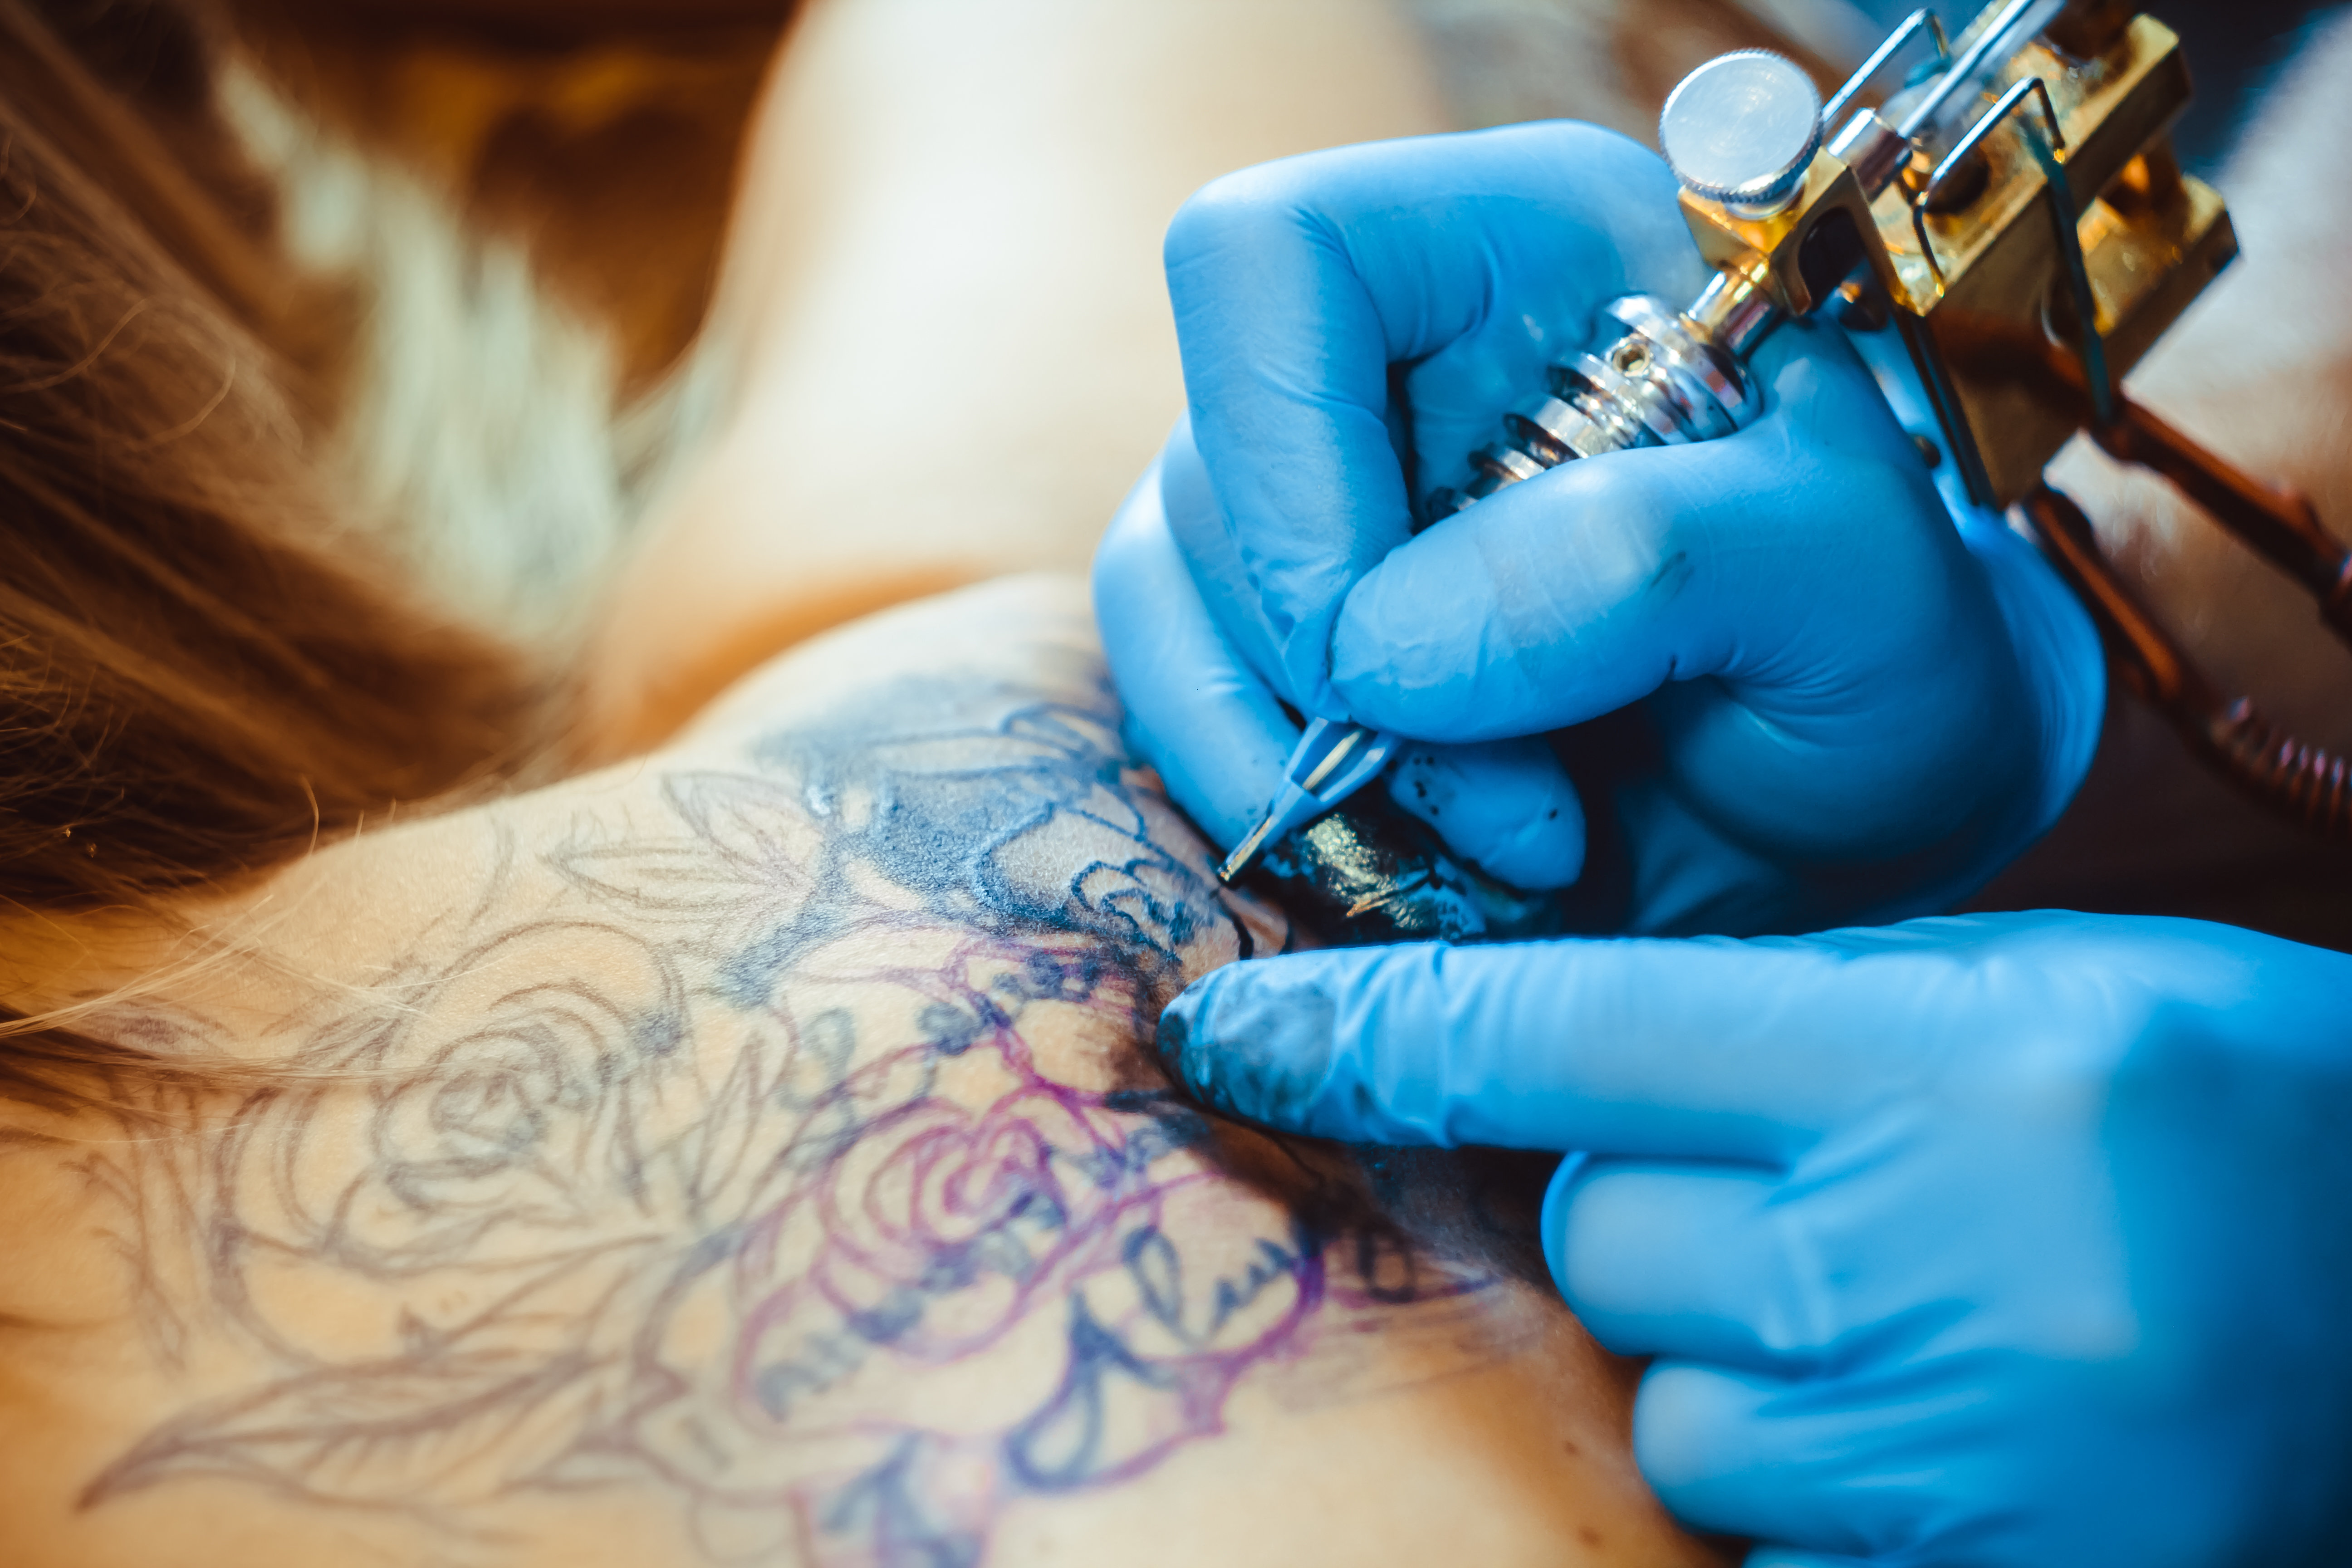 Tattoos Absolutely Bad For Your Health BioHacker Says